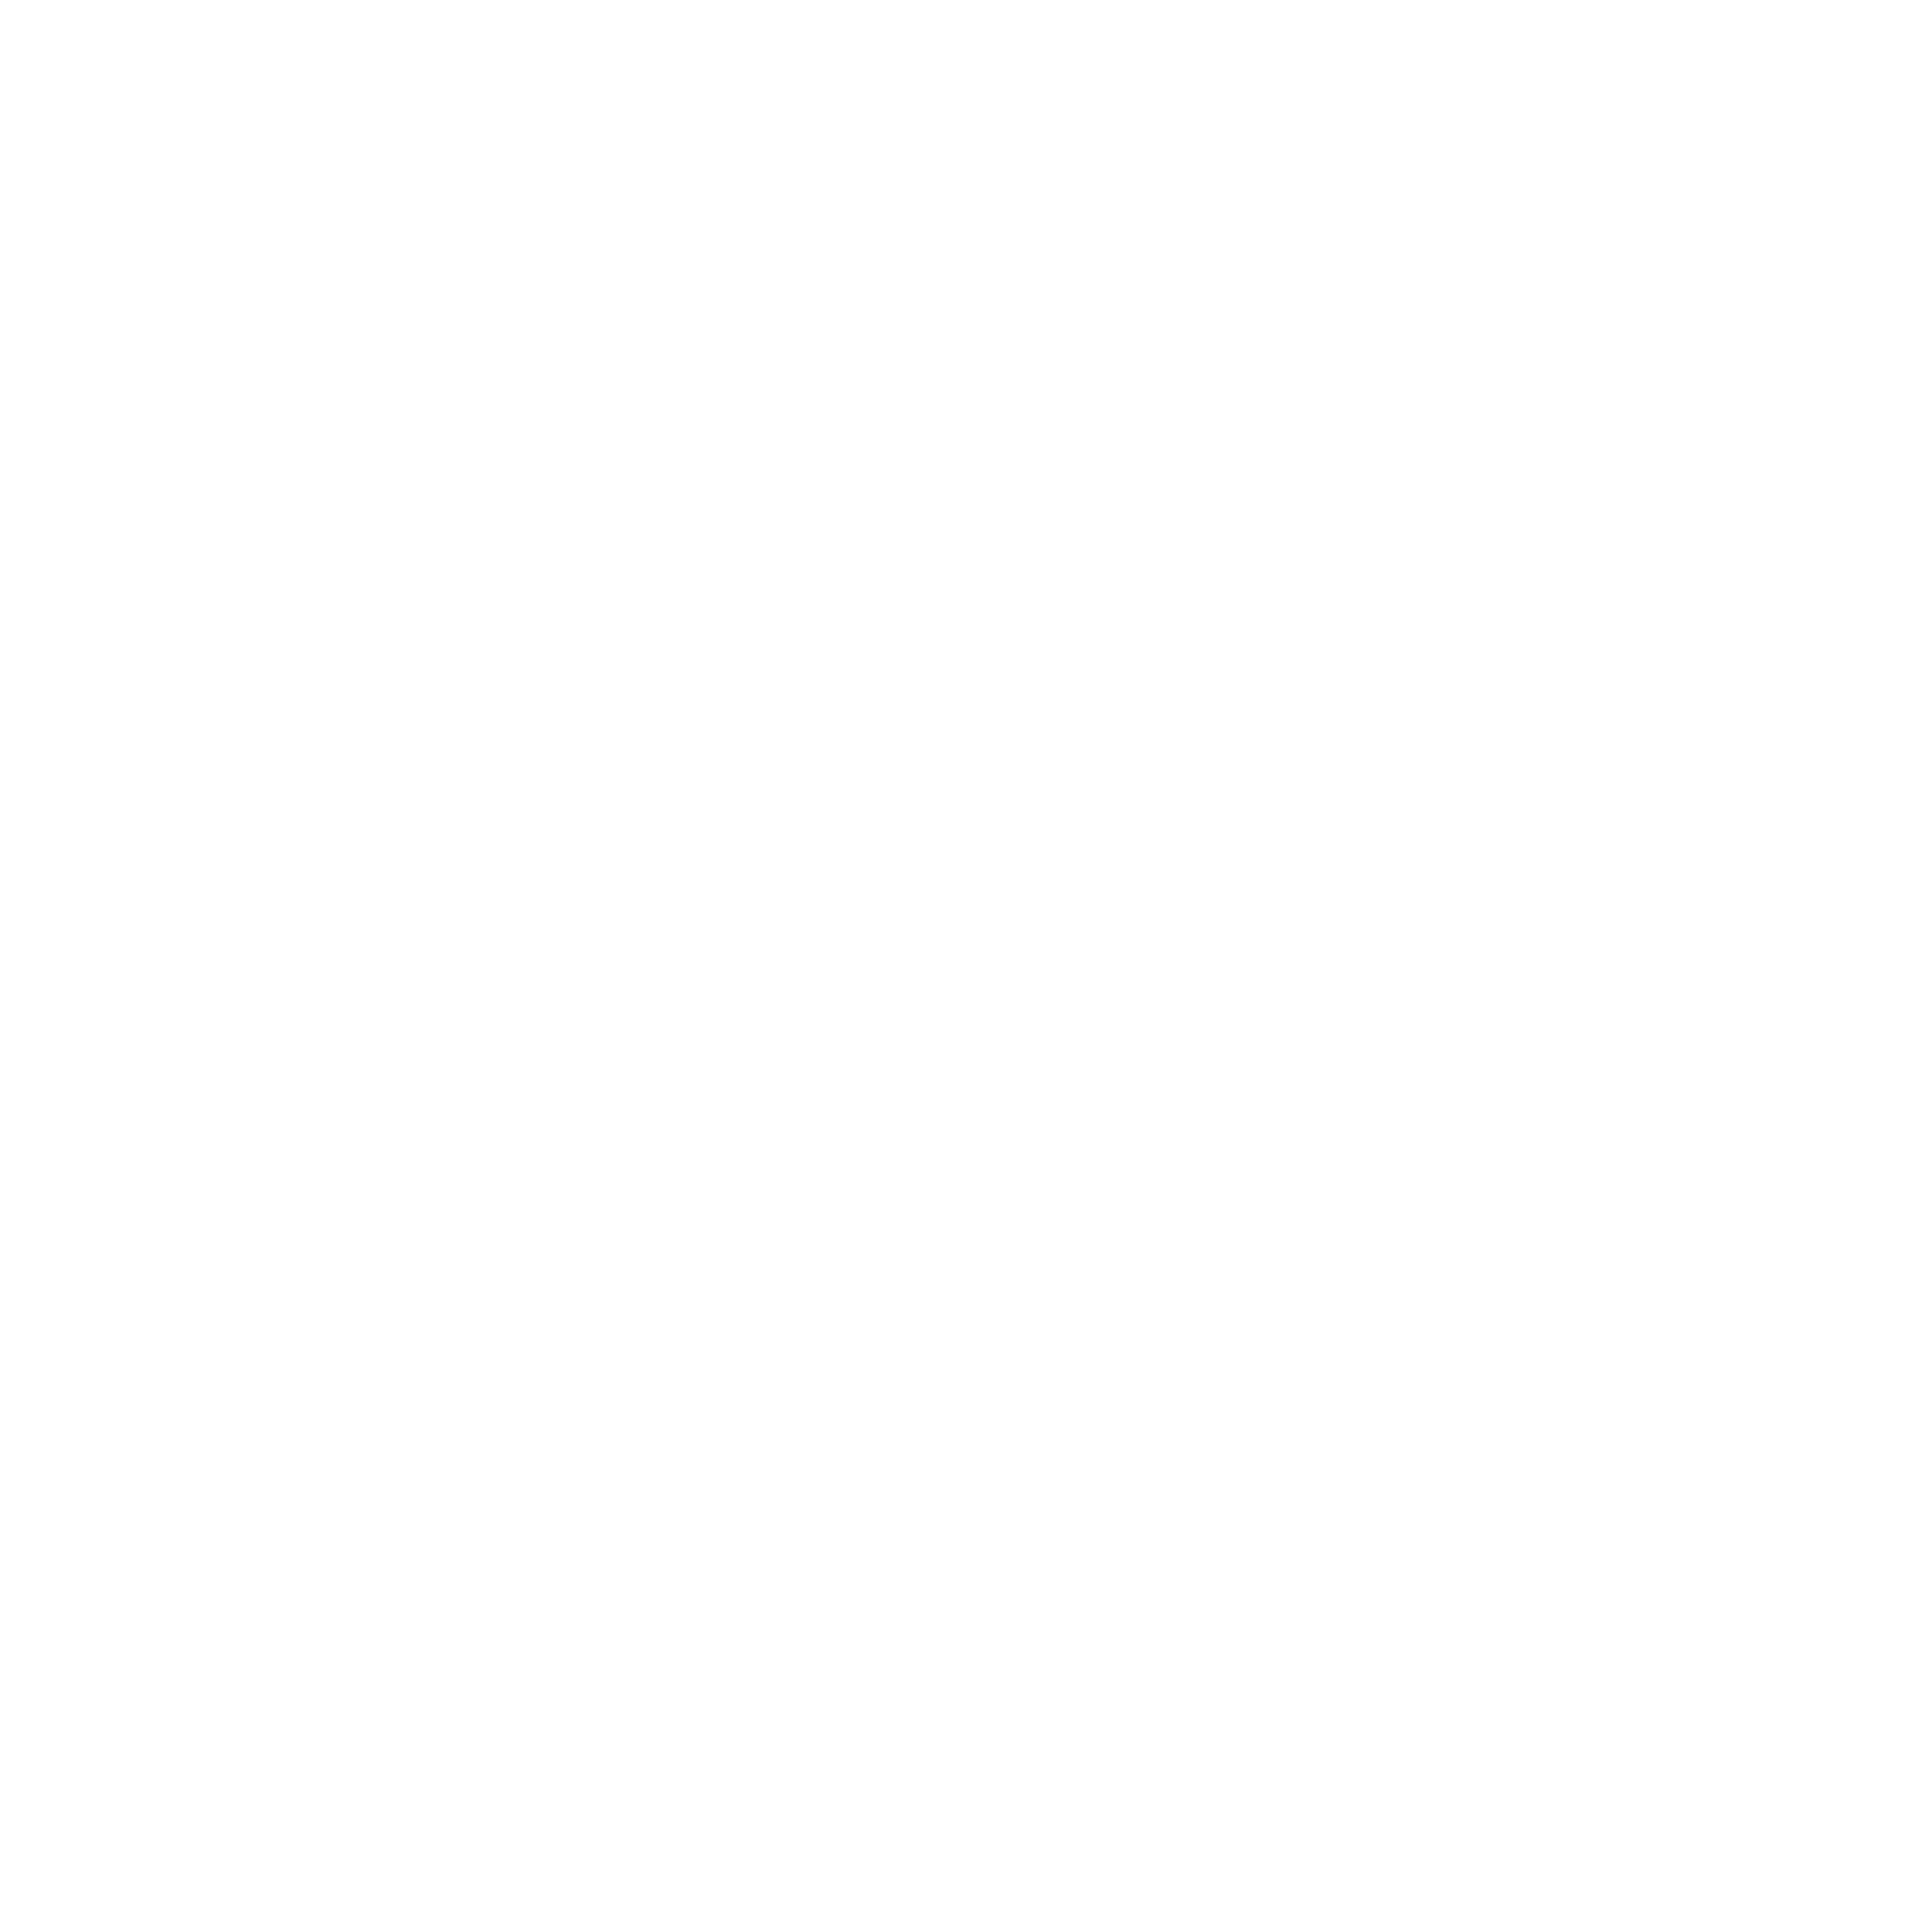 Halo Data Devices Logo Black And White - Black And White Halo, Transparent background PNG HD thumbnail